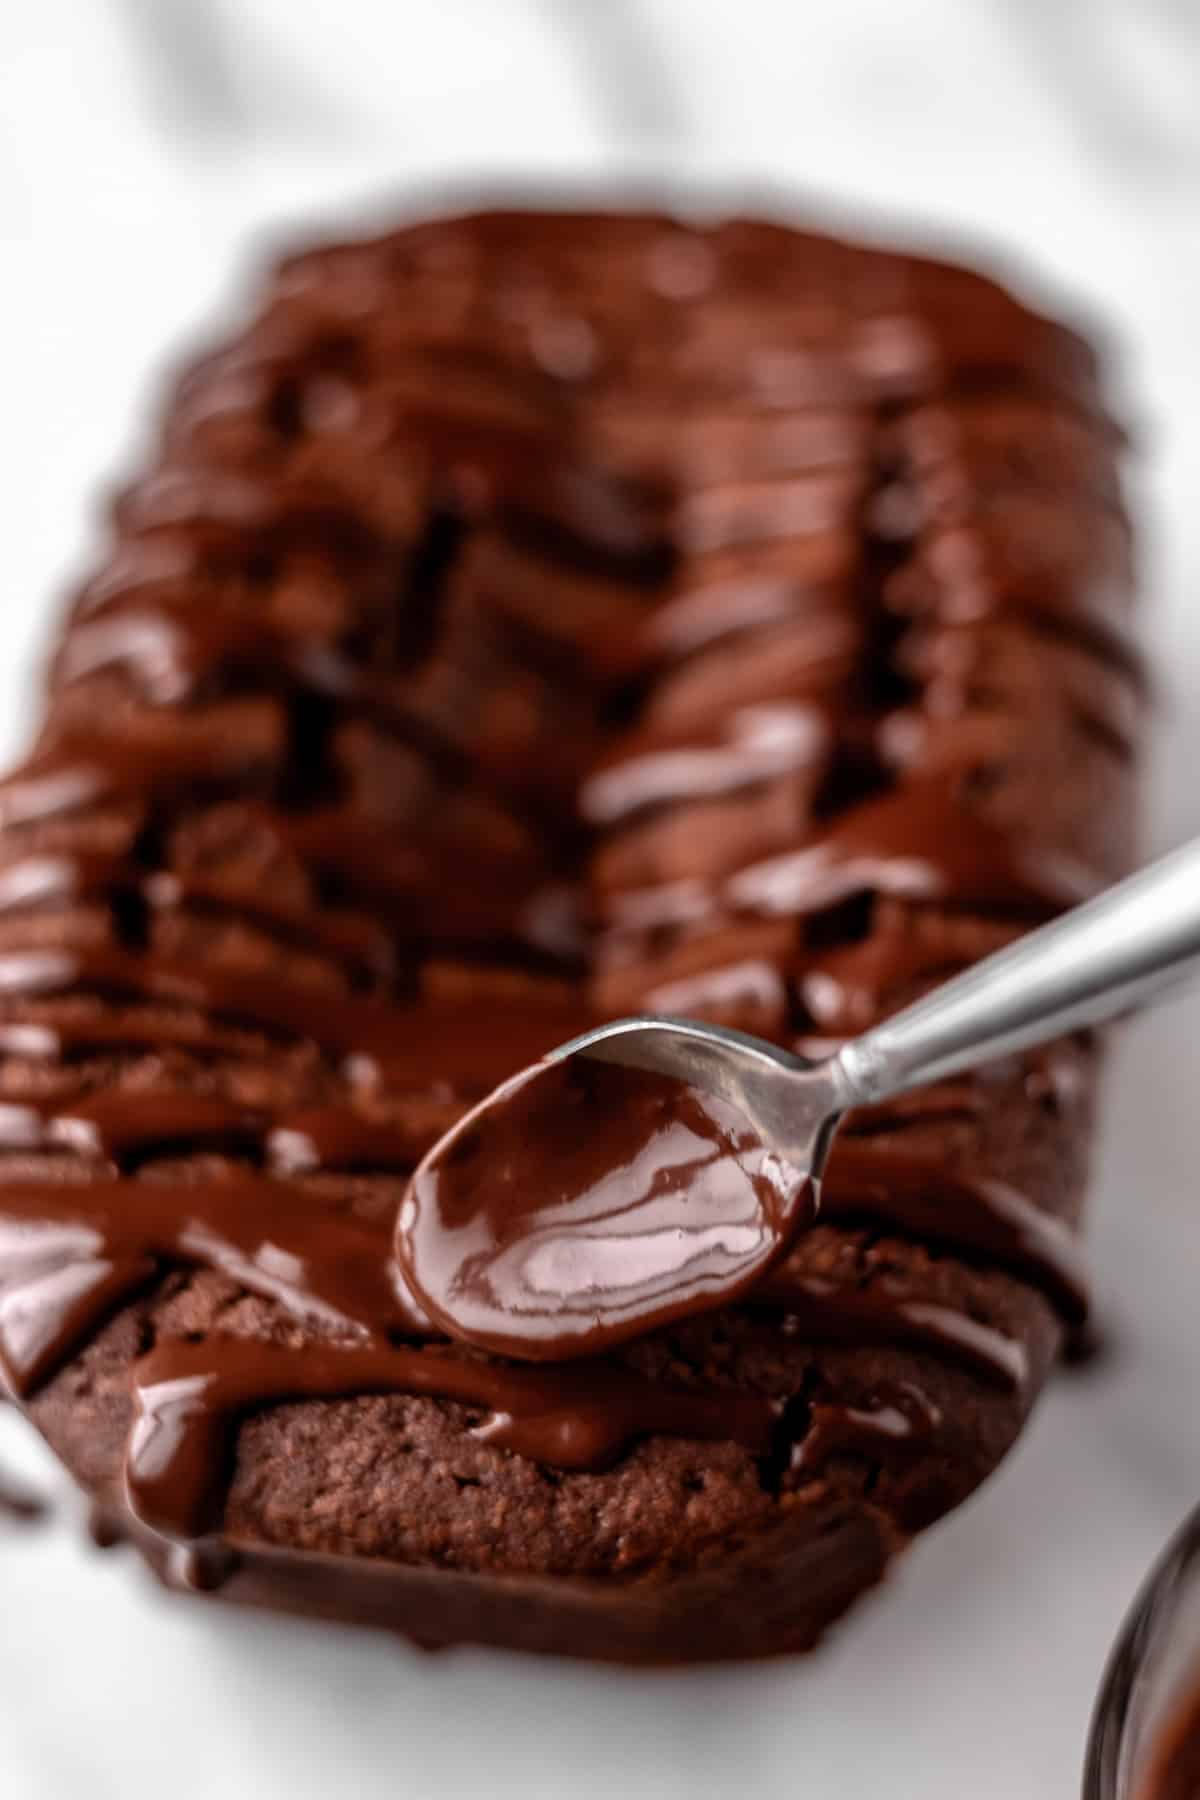 Close up of chocolate glaze being drizzled on top of a chocolate pound cake.